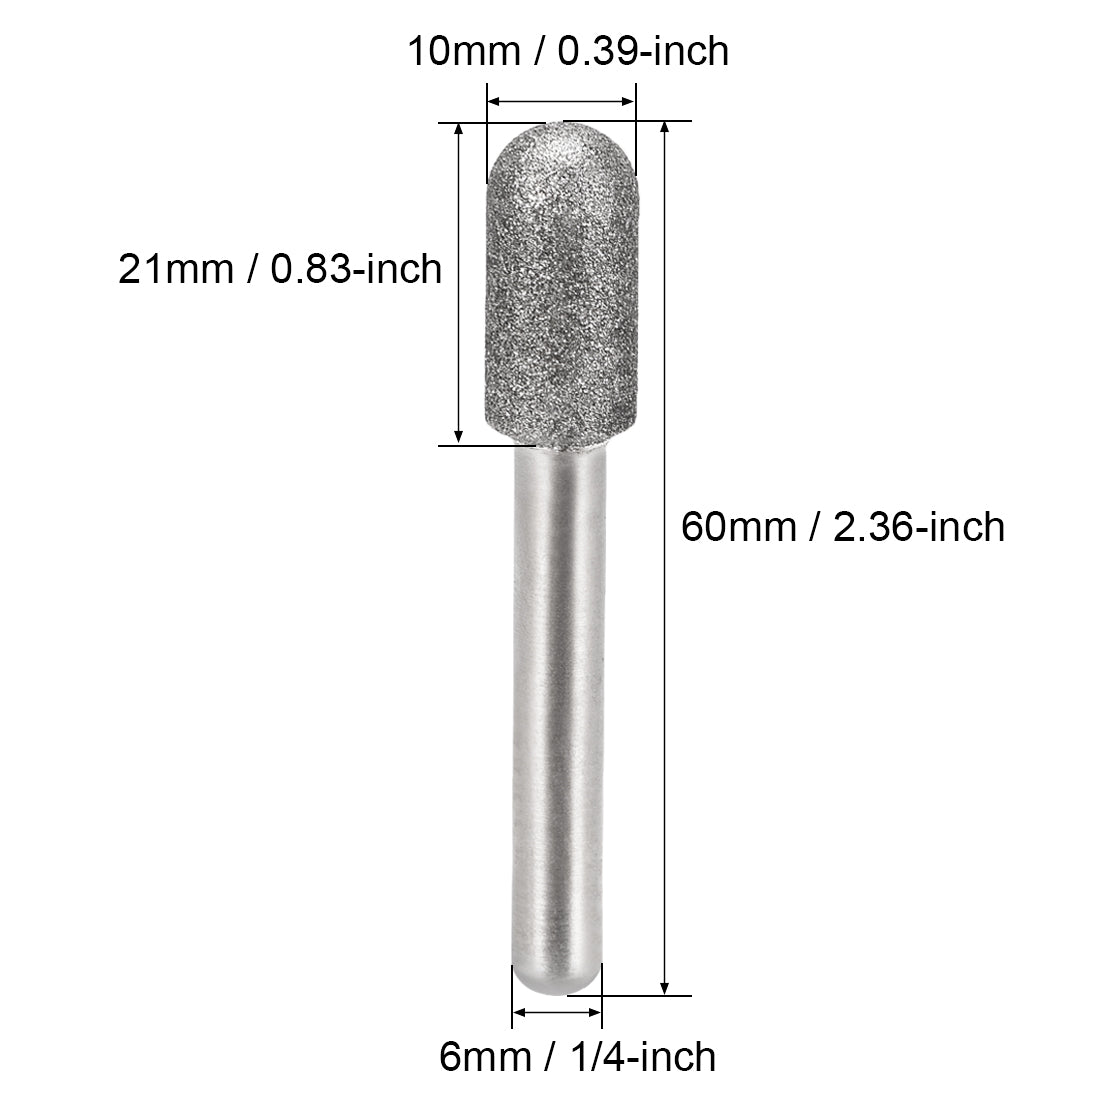 Uxcell Uxcell Diamond Burrs Grinding Drill Bits for Carving Rotary Tool 1/4-Inch Shank 6mm Cylindrical Ball Nose 150 Grit 10 Pcs